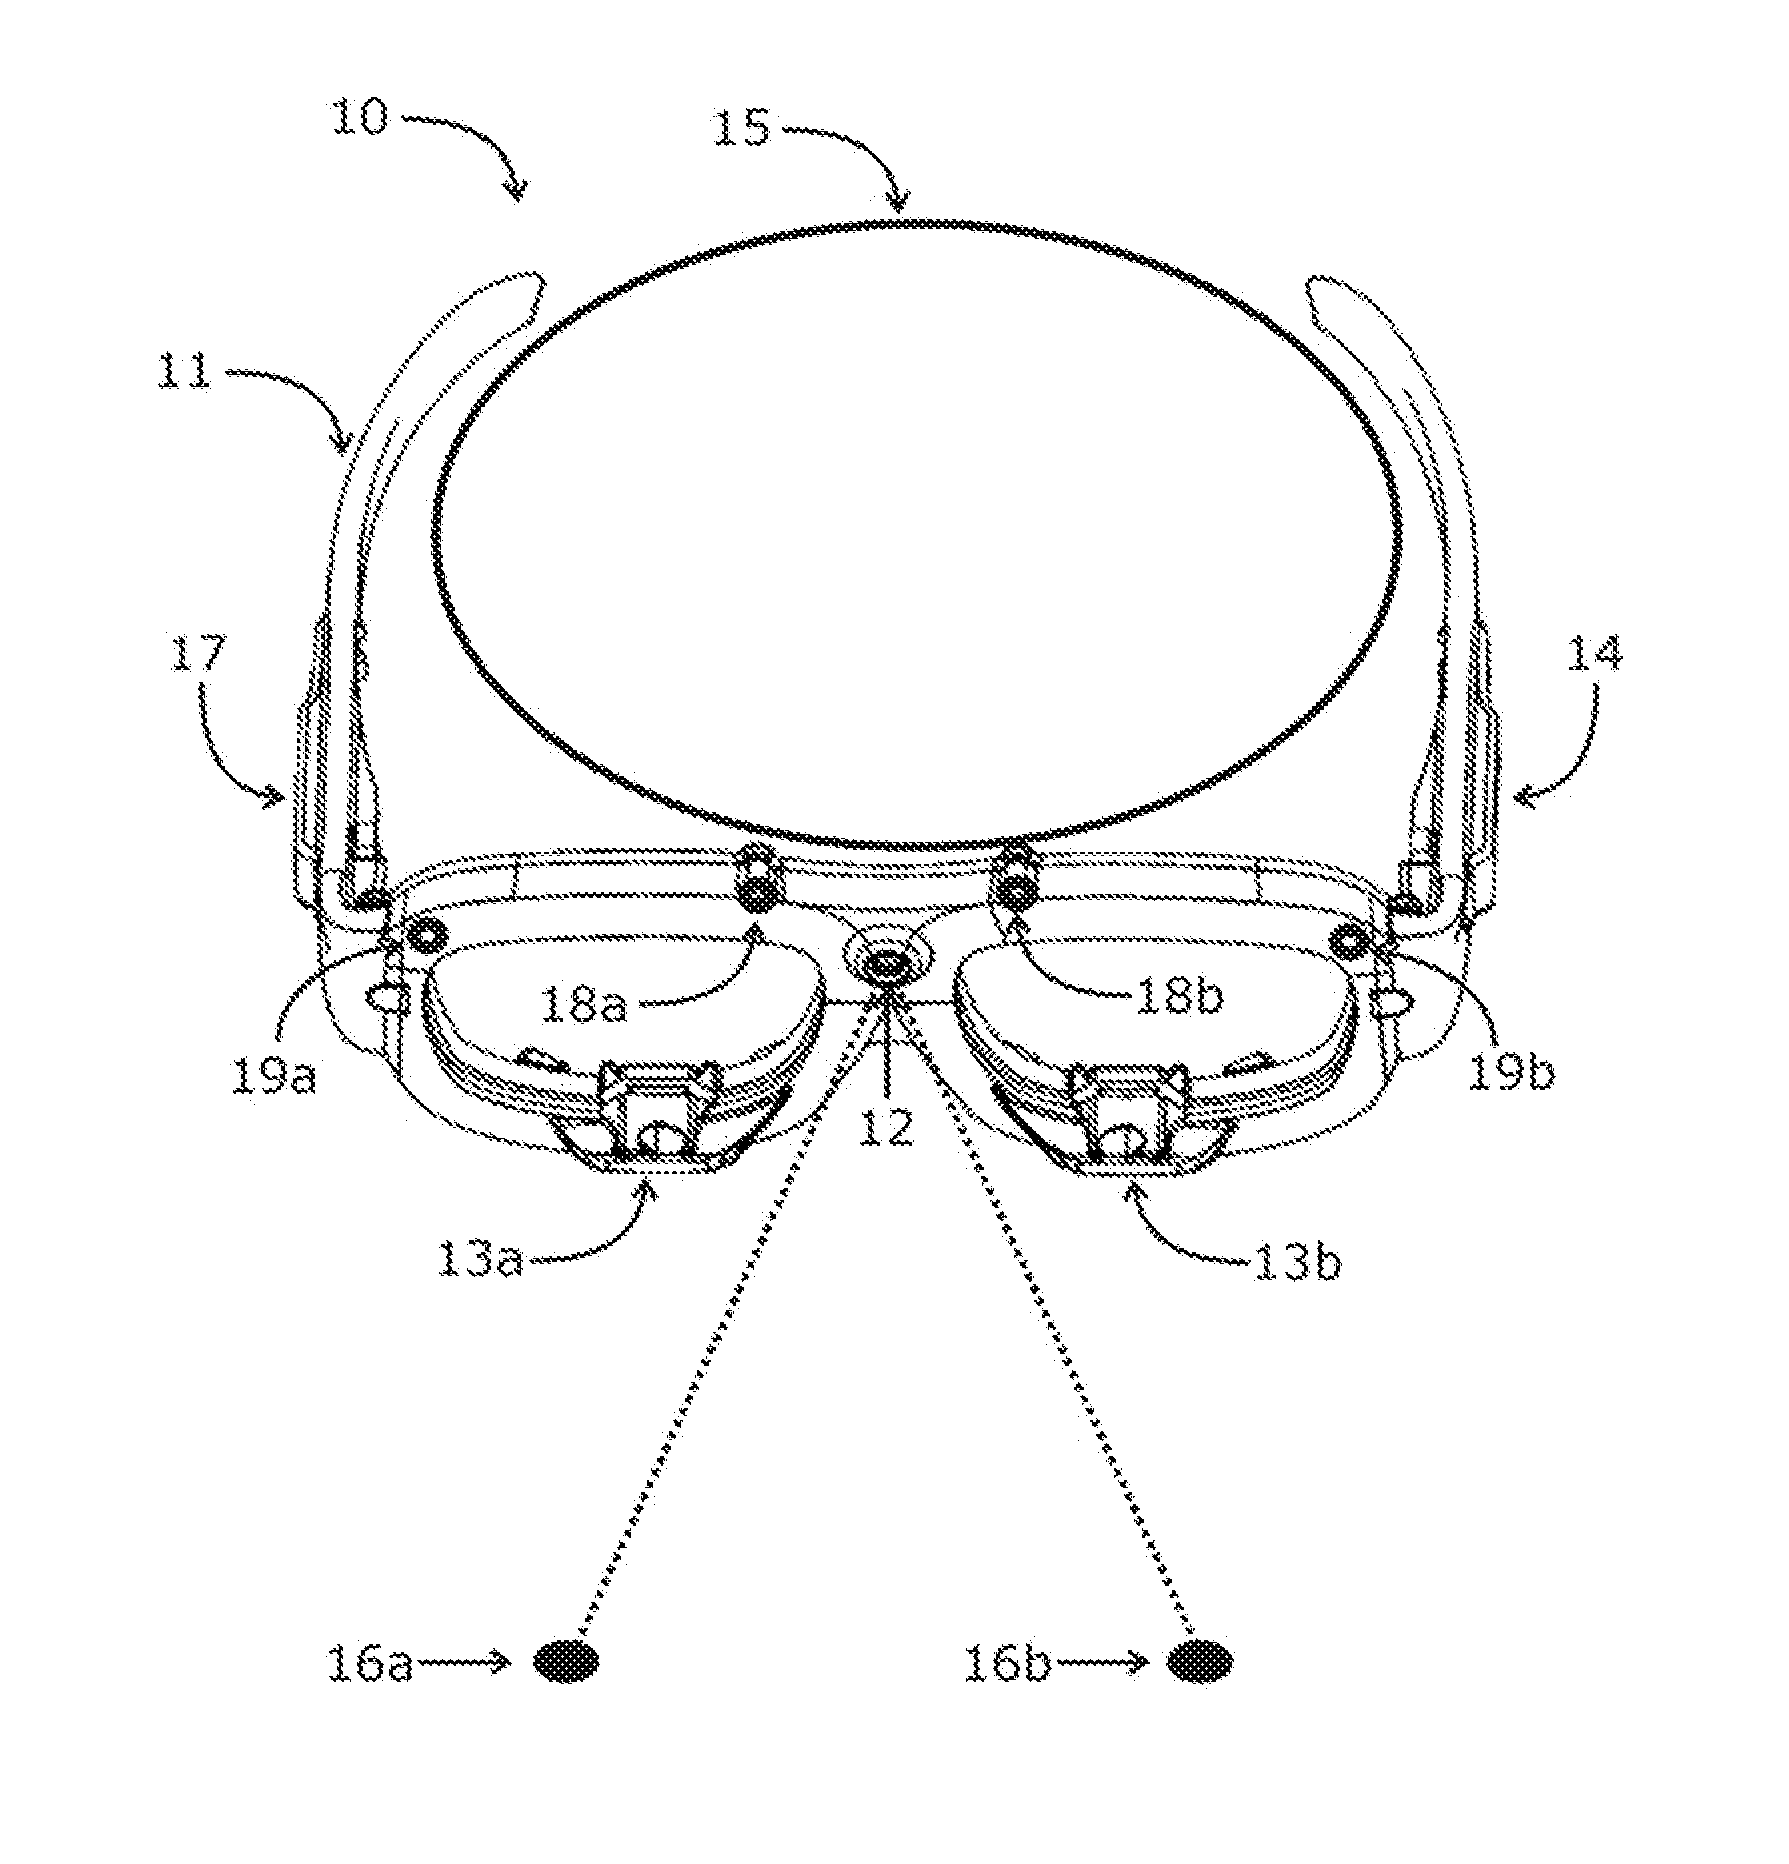 Systems and methods for identifying gaze tracking scene reference locations